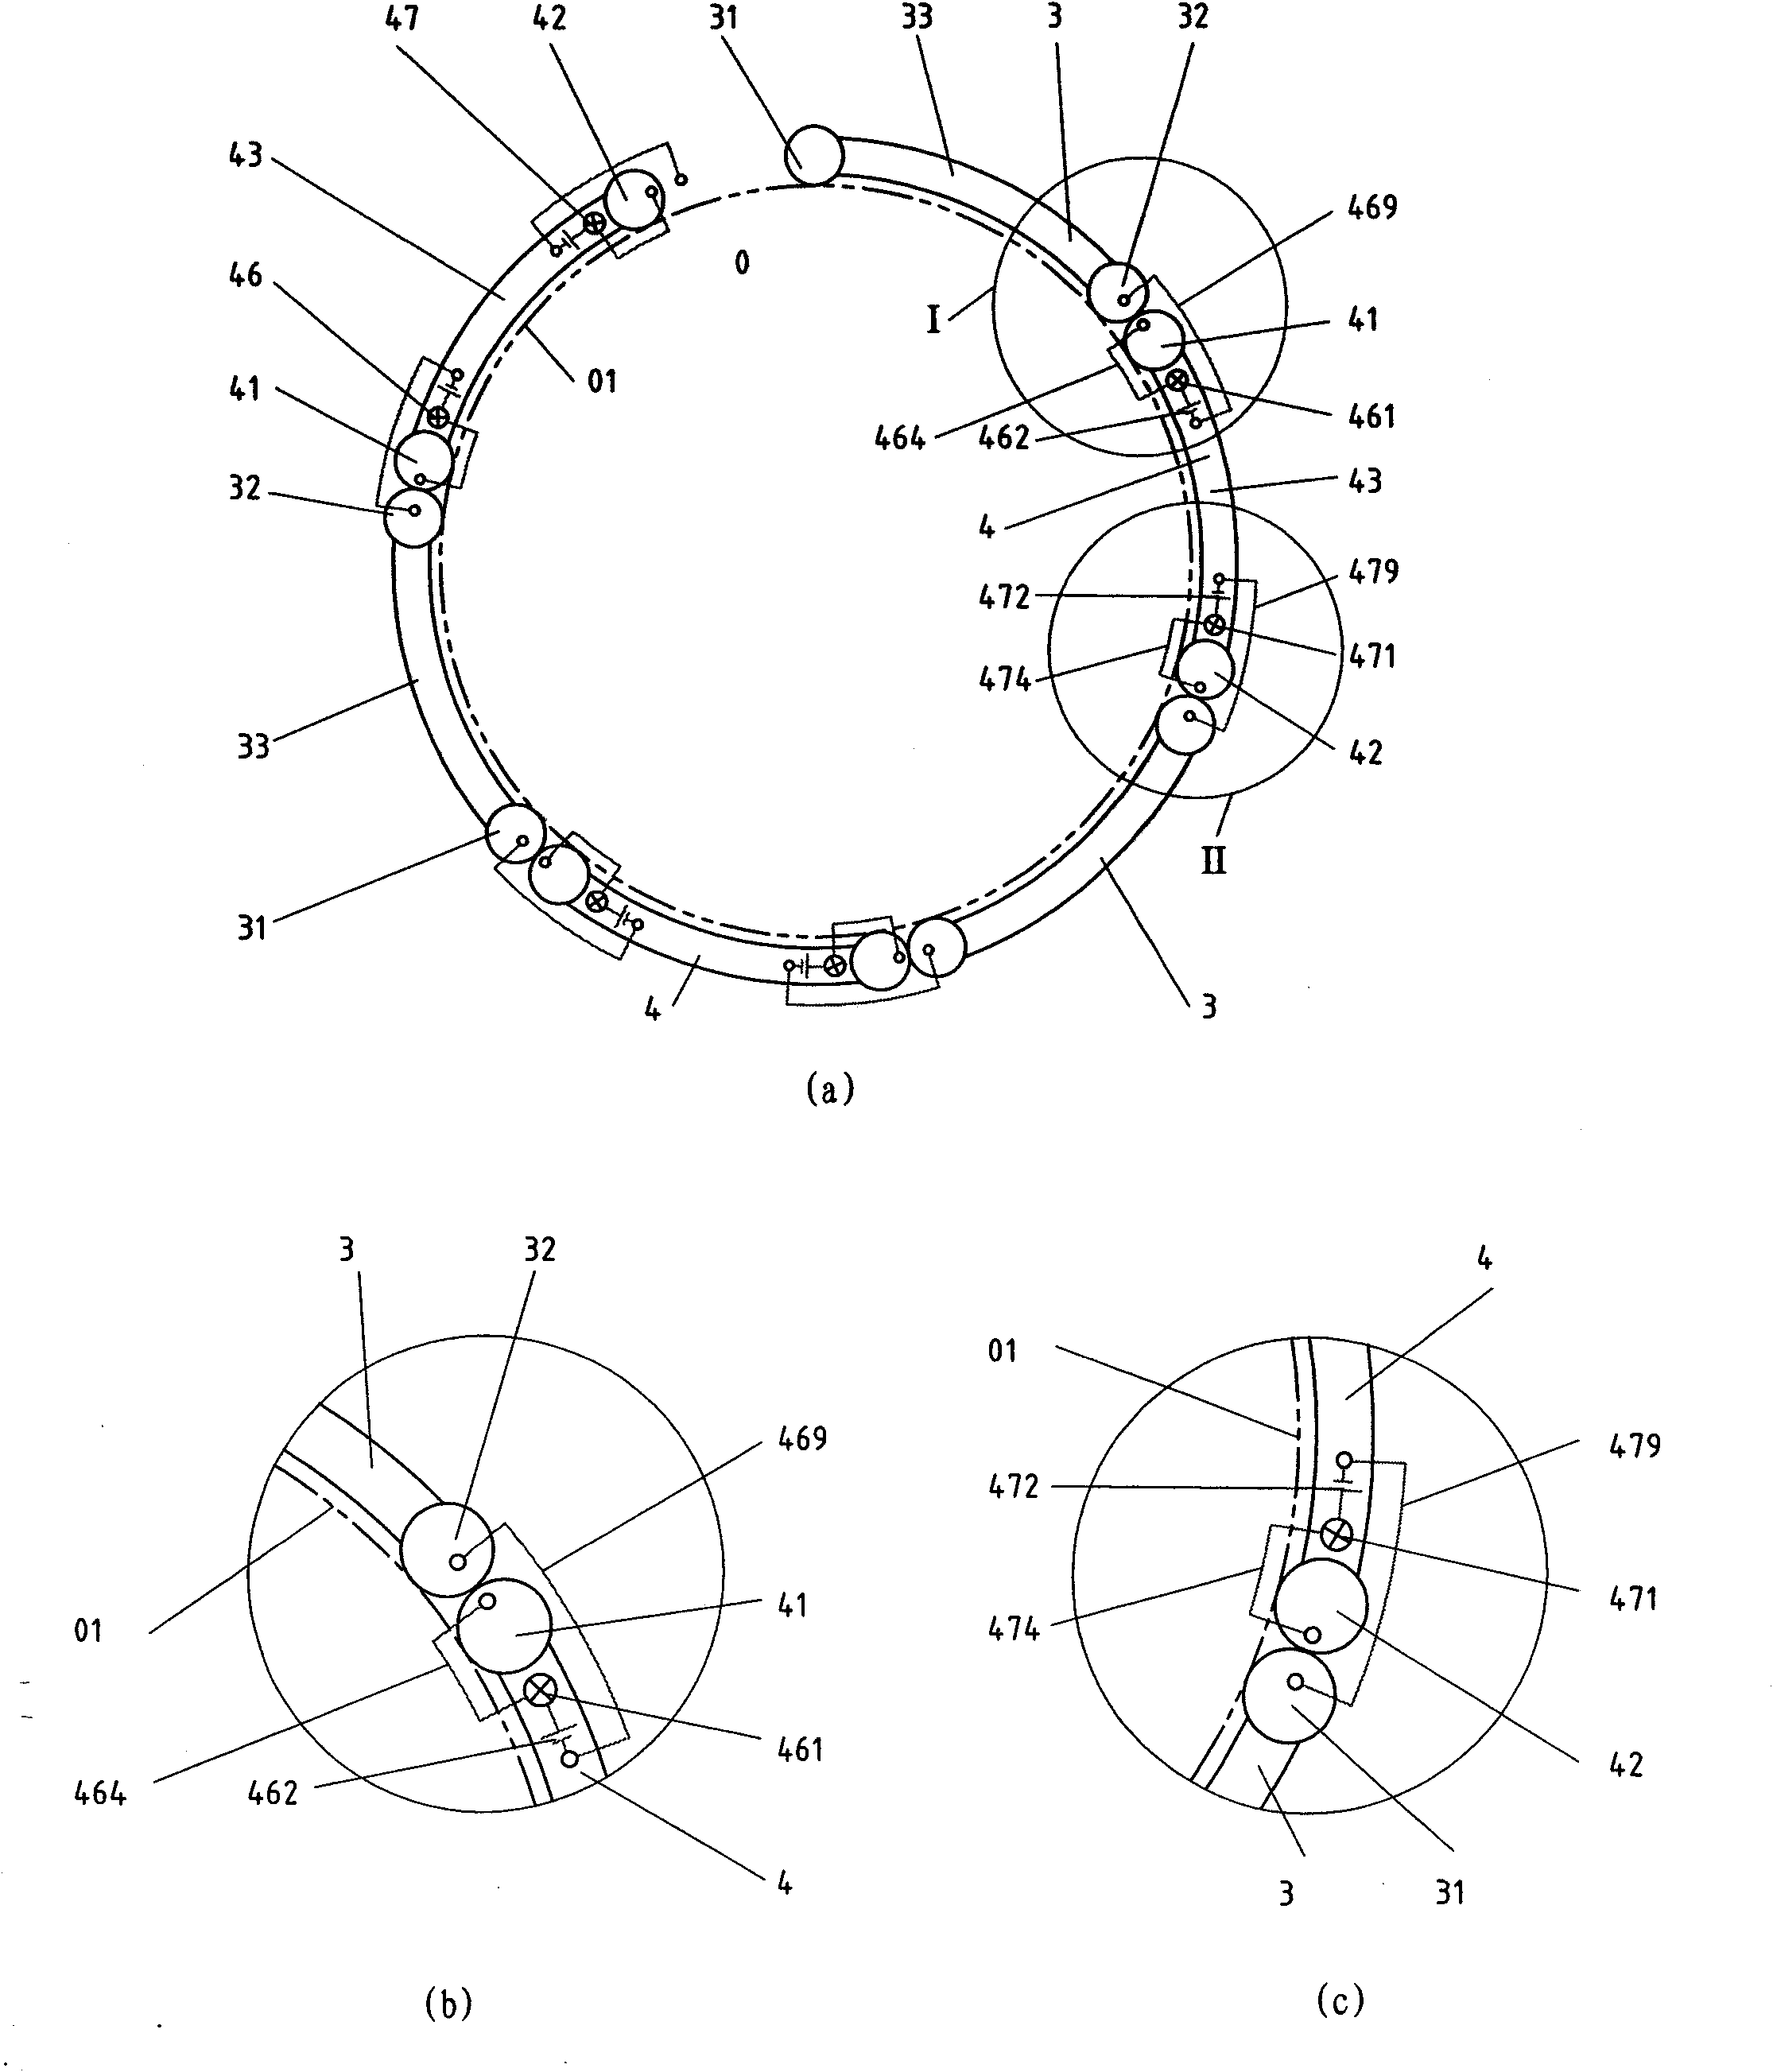 Contact indicating method based on insulated measuring unit pair on surface of measured object